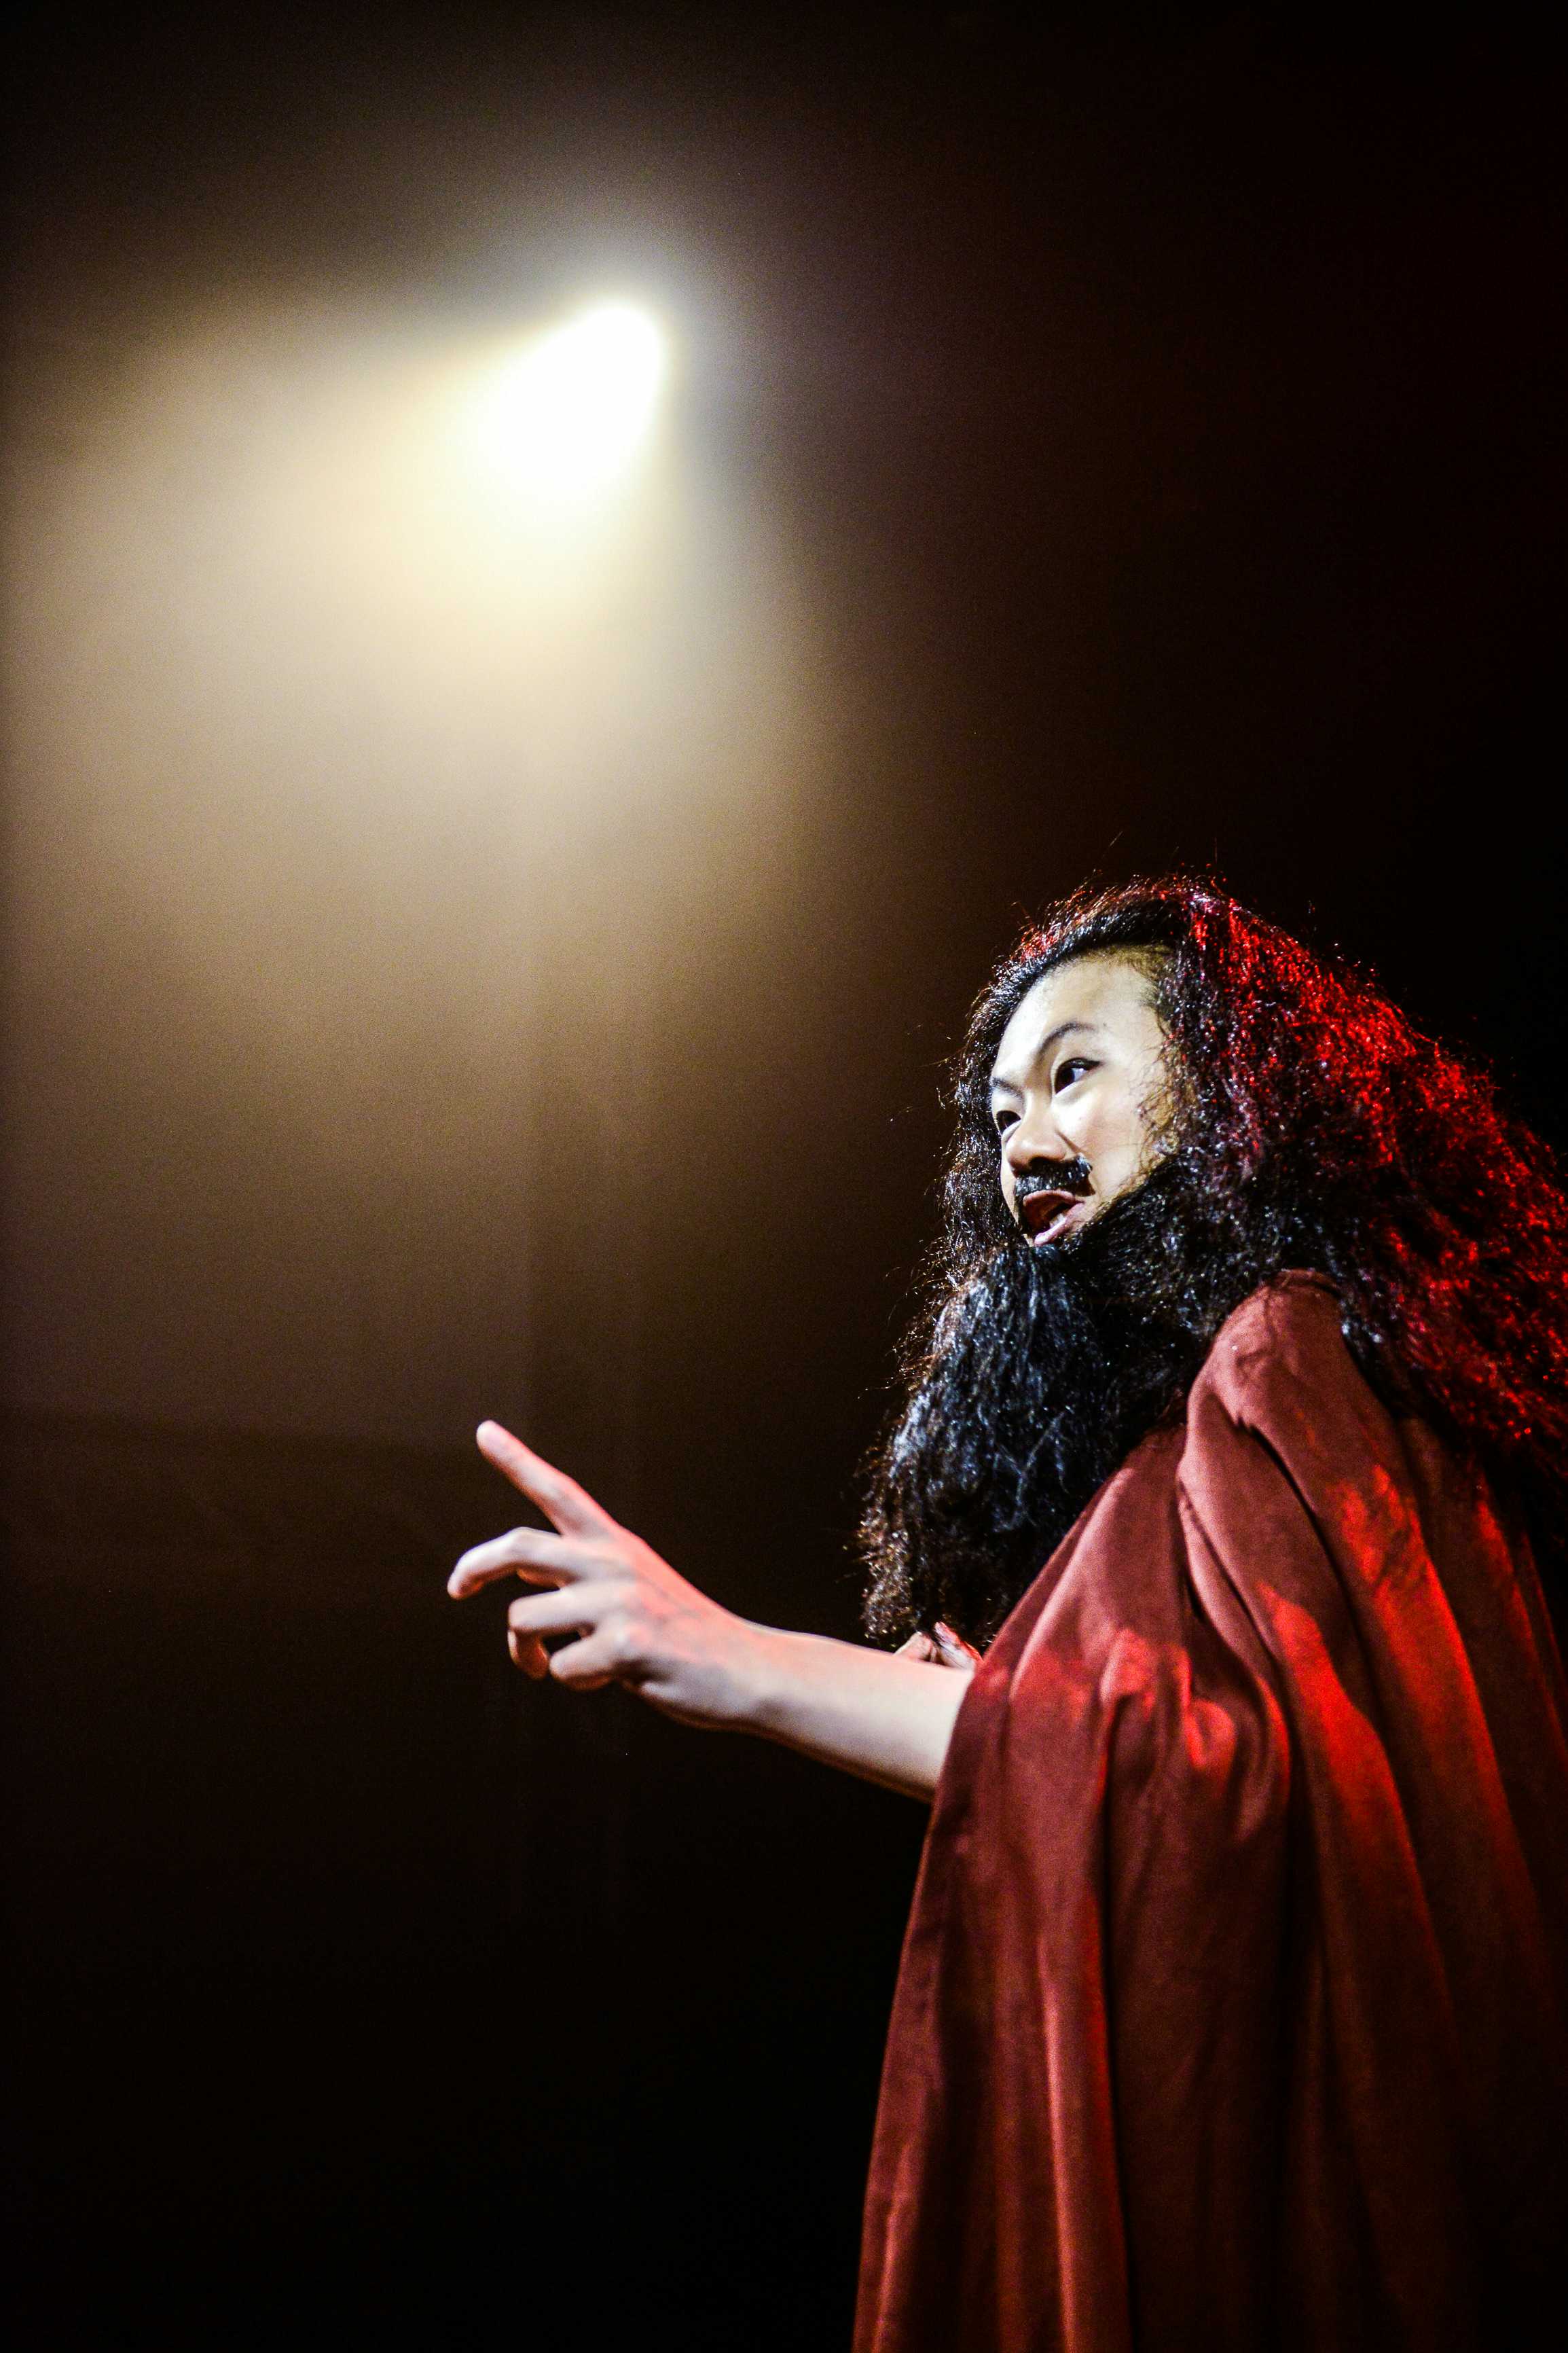 Ai ah! This Menelaus is really troublesome | Featuring: Michelle Li | Tagged as: Show, The Furies Variations | Photo: Fung Wai Sun |  (Rooftop Productions • Hong Kong Theatre Company)  | Rooftop Productions • Hong Kong Theatre Company